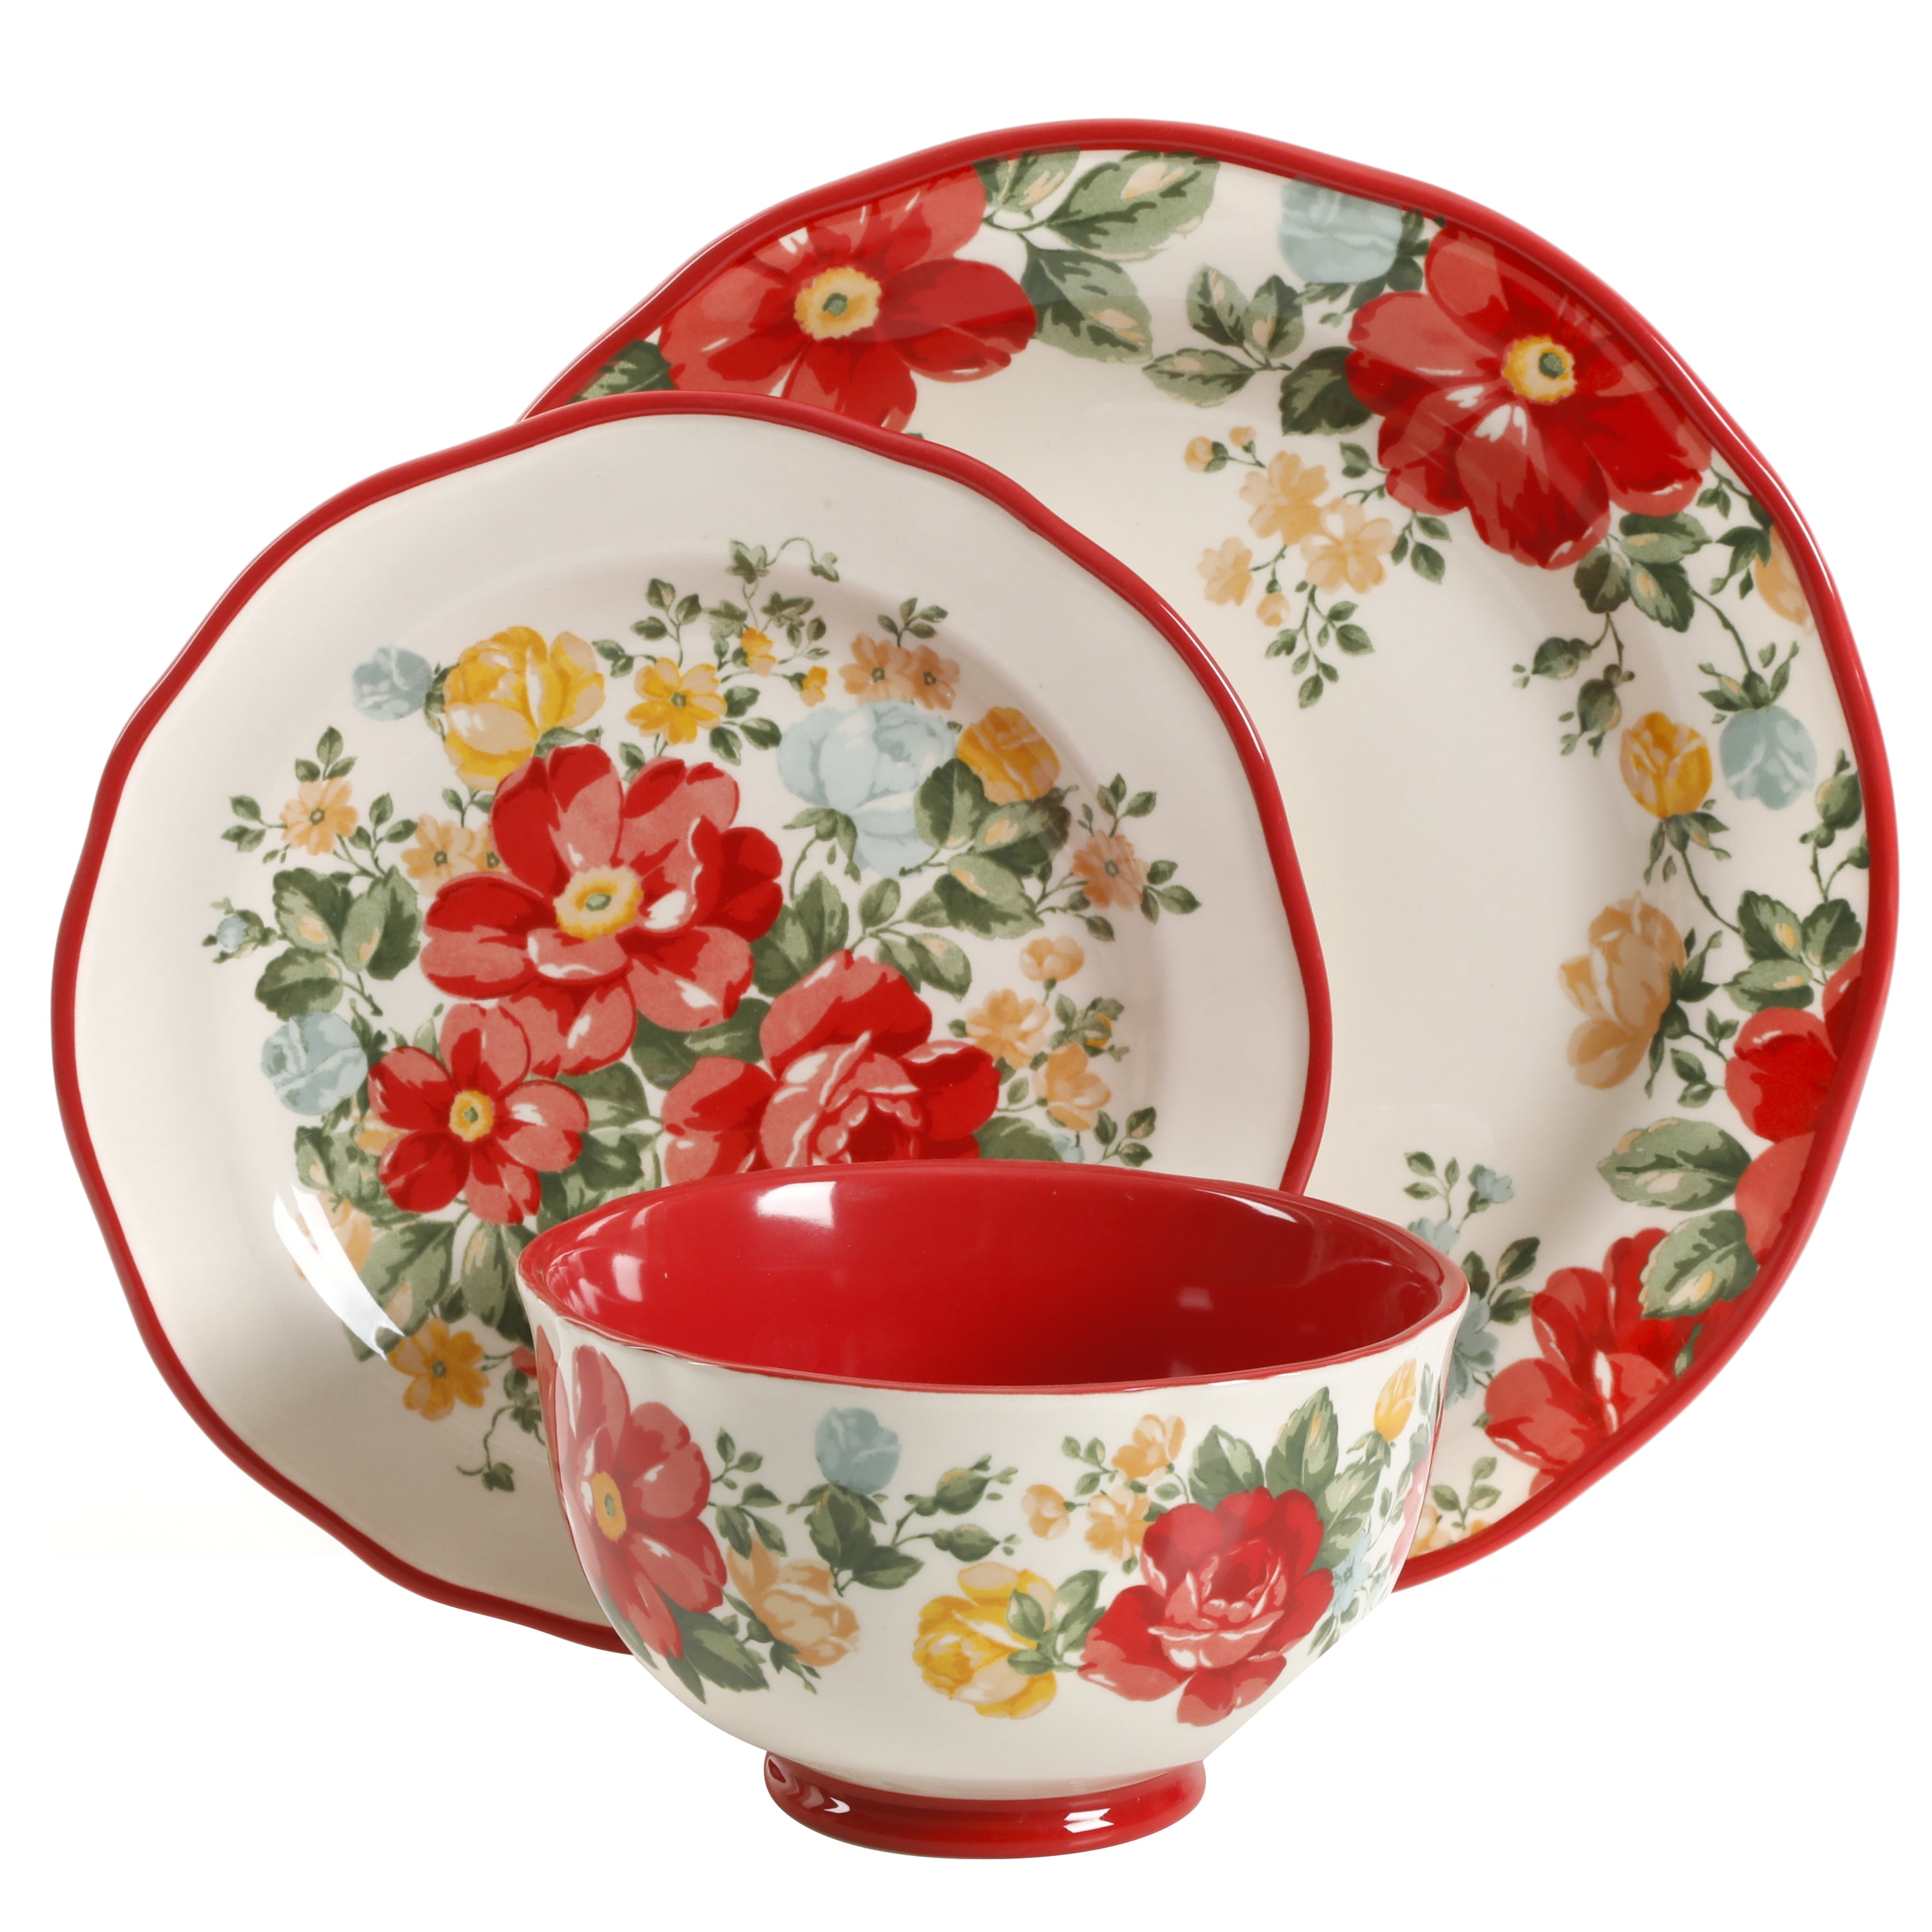 The Pioneer Woman Dinnerware Set Is Almost 40% Off Right Now